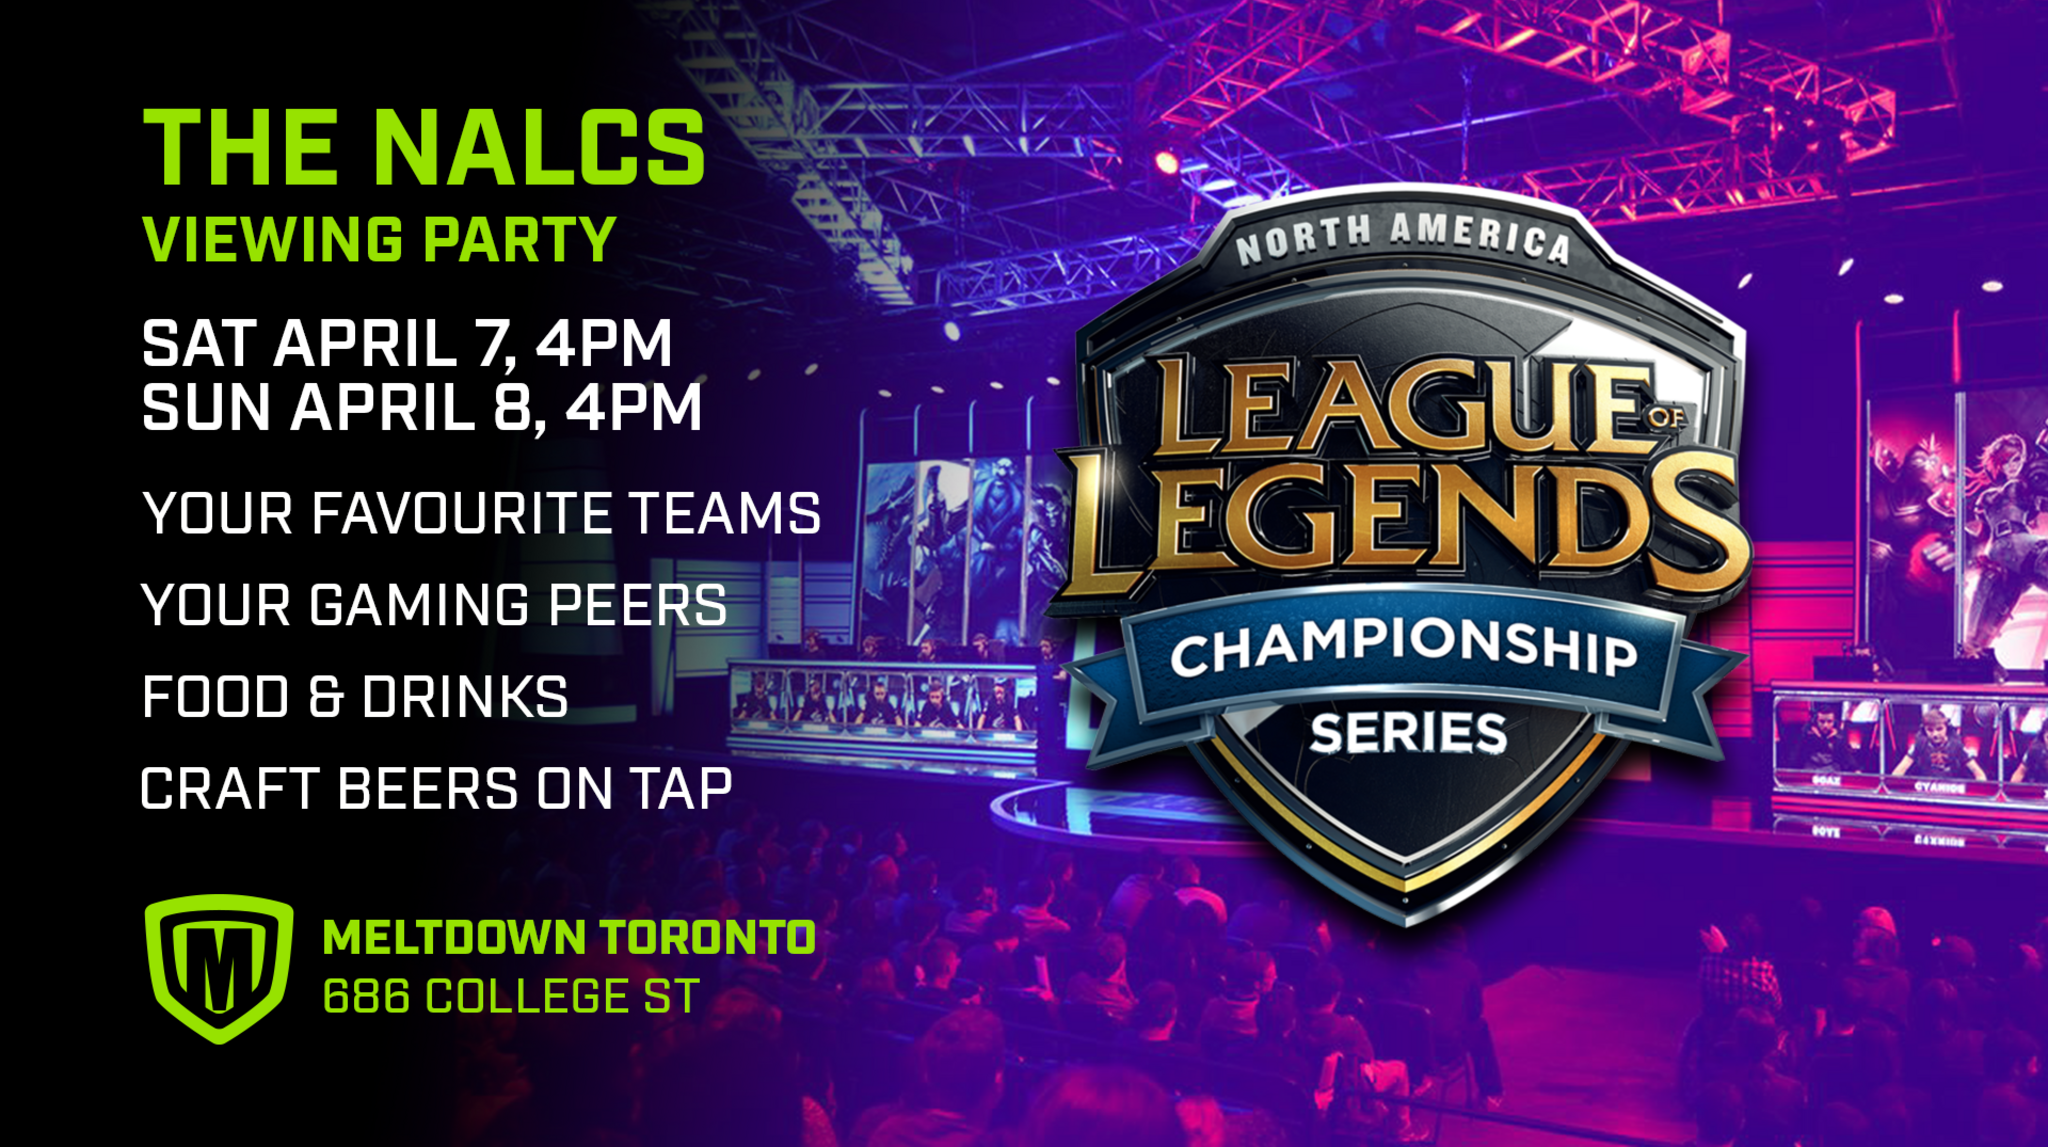 NALCS: North American League of Legends Championships Series Viewing Party